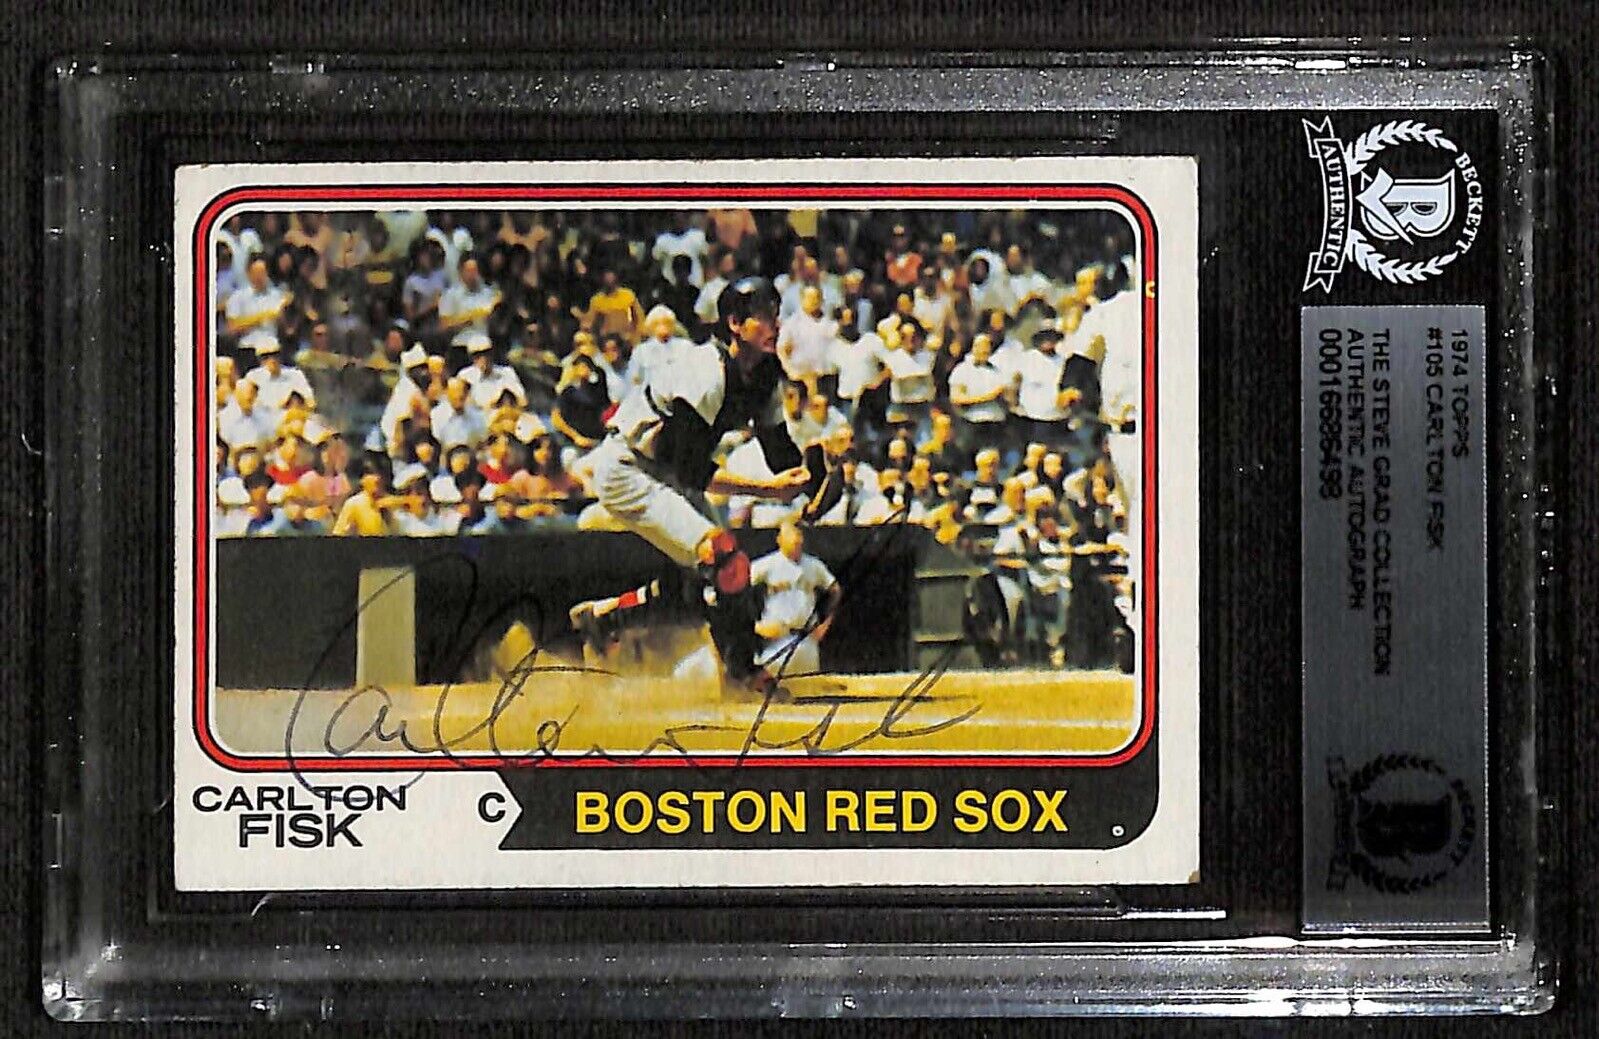 1974 Topps #105 Carlton Fisk VINTAGE Signed Card BECKETT (Grad Collection)